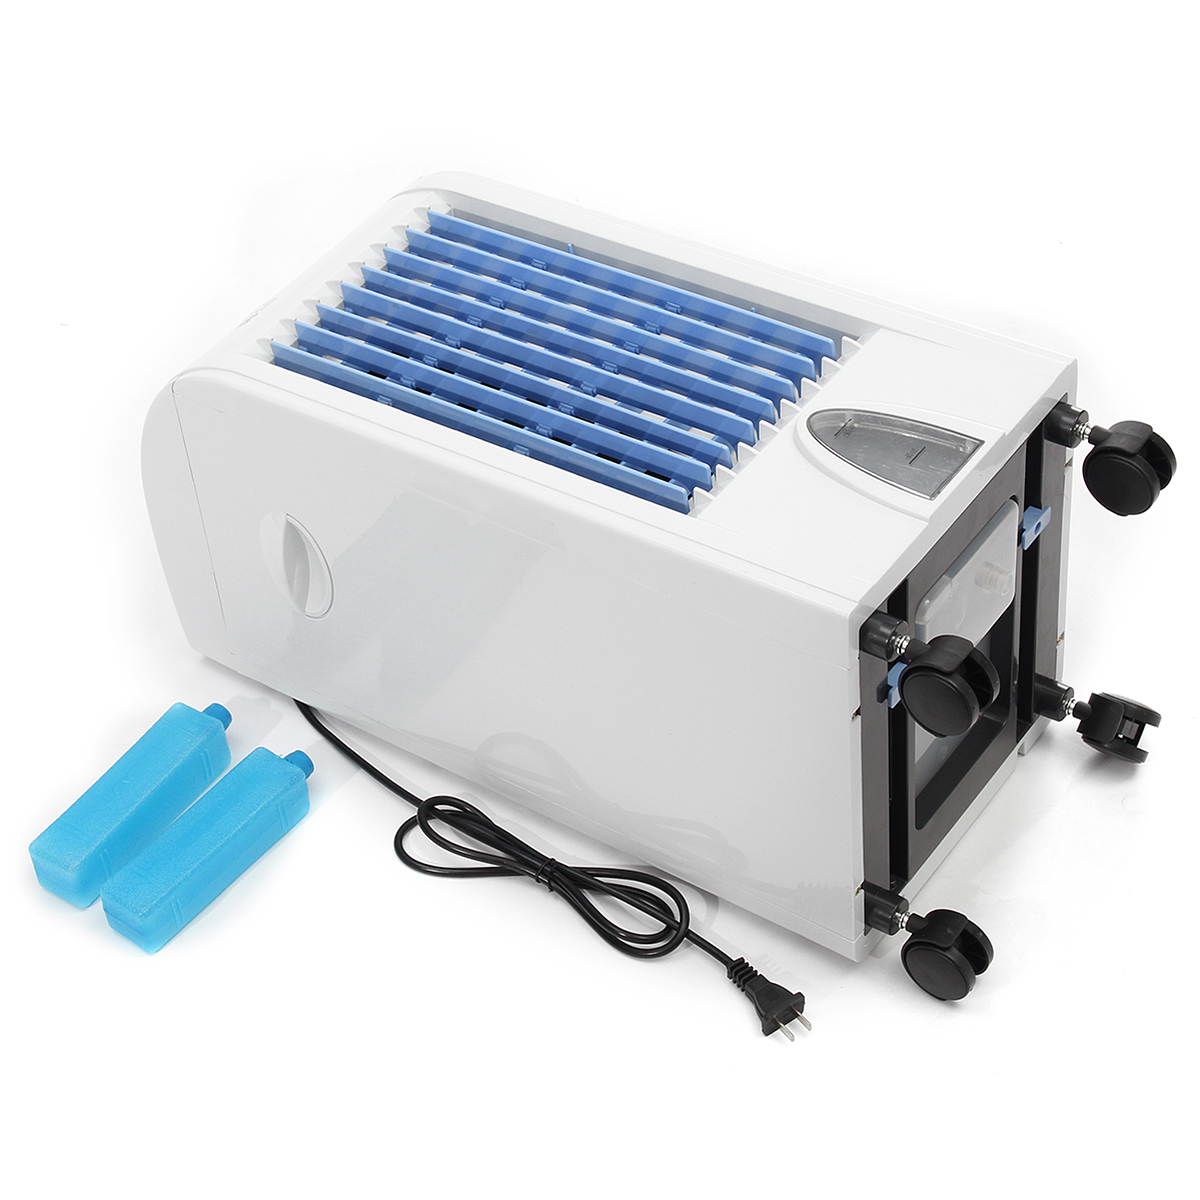 Portable-Air-Conditioner-Air-Conditioning-Fan-Water-Ice-Cooler-Humidifier-Room-1217000-3